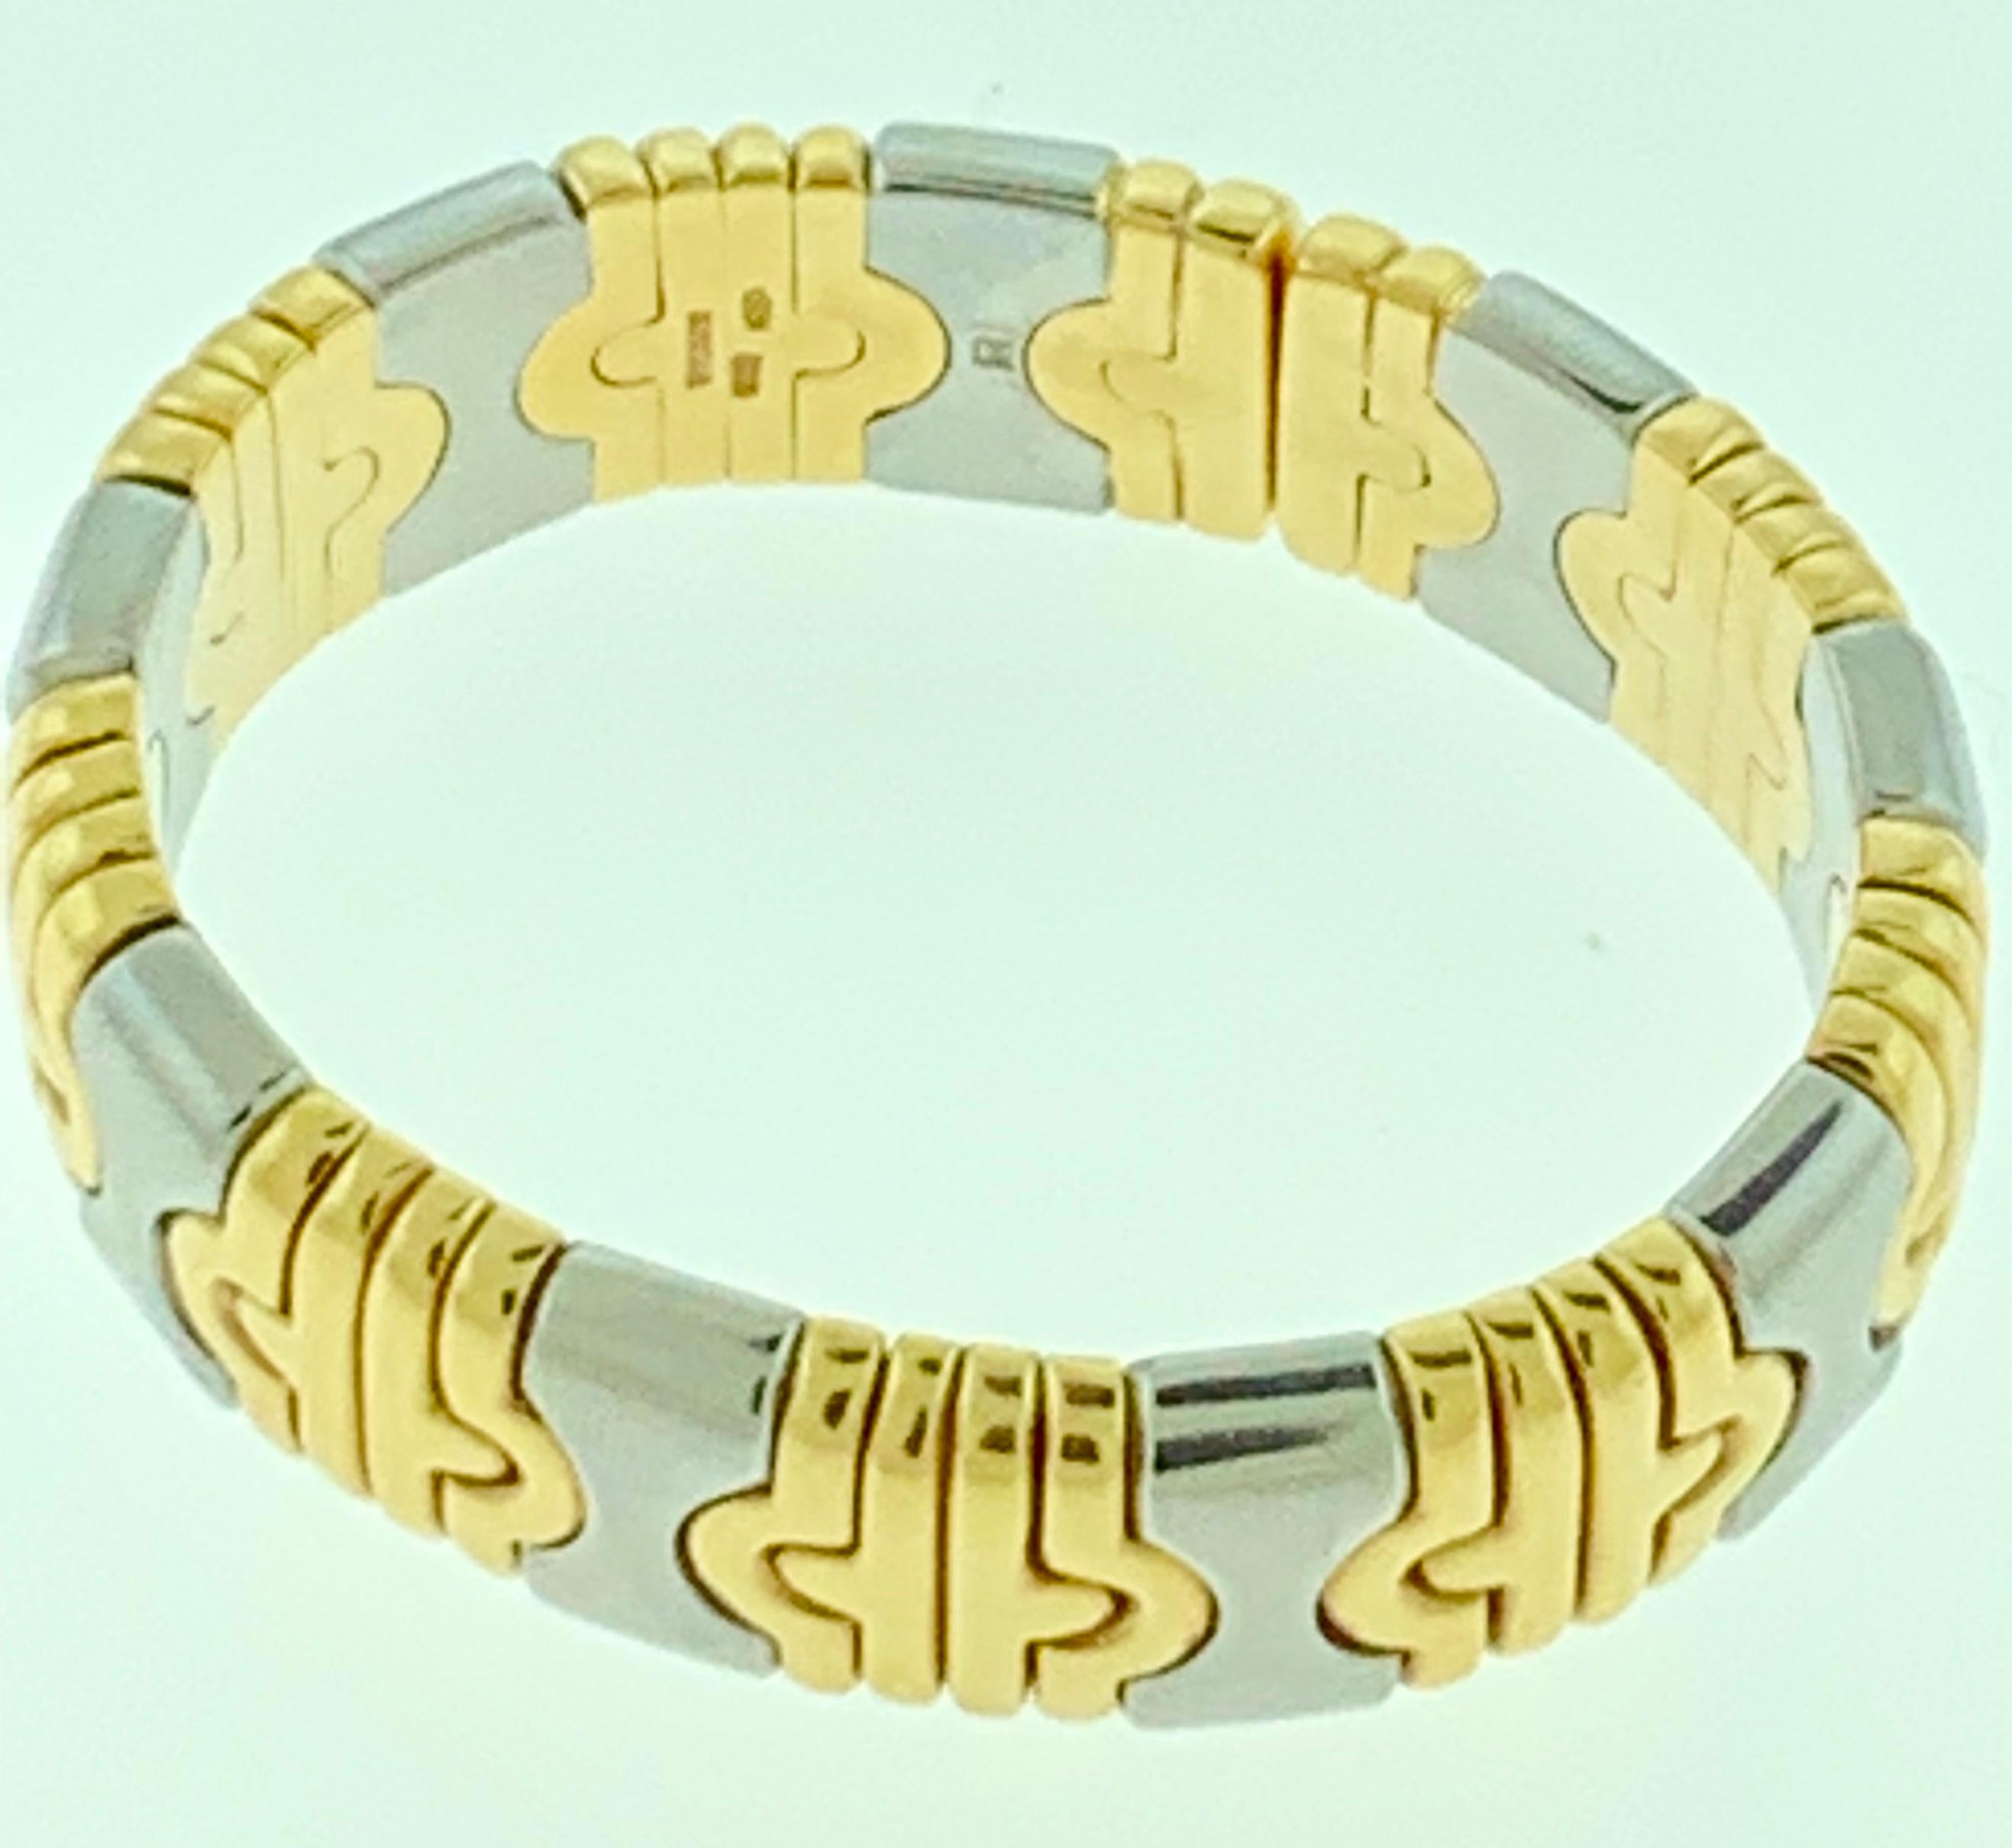 Multi-gold Parentesi Cuff 18k Yellow & White Gold 15mm Bracelet in two Tone

Style: Bvlgari Parentesi Two Tone Cuff Bracelet
Metal: 18 K Yellow Gold & Stainless Steel
Size: Inside Circumference 6 inches, Fits very small wrist
Left to Right: 2.2